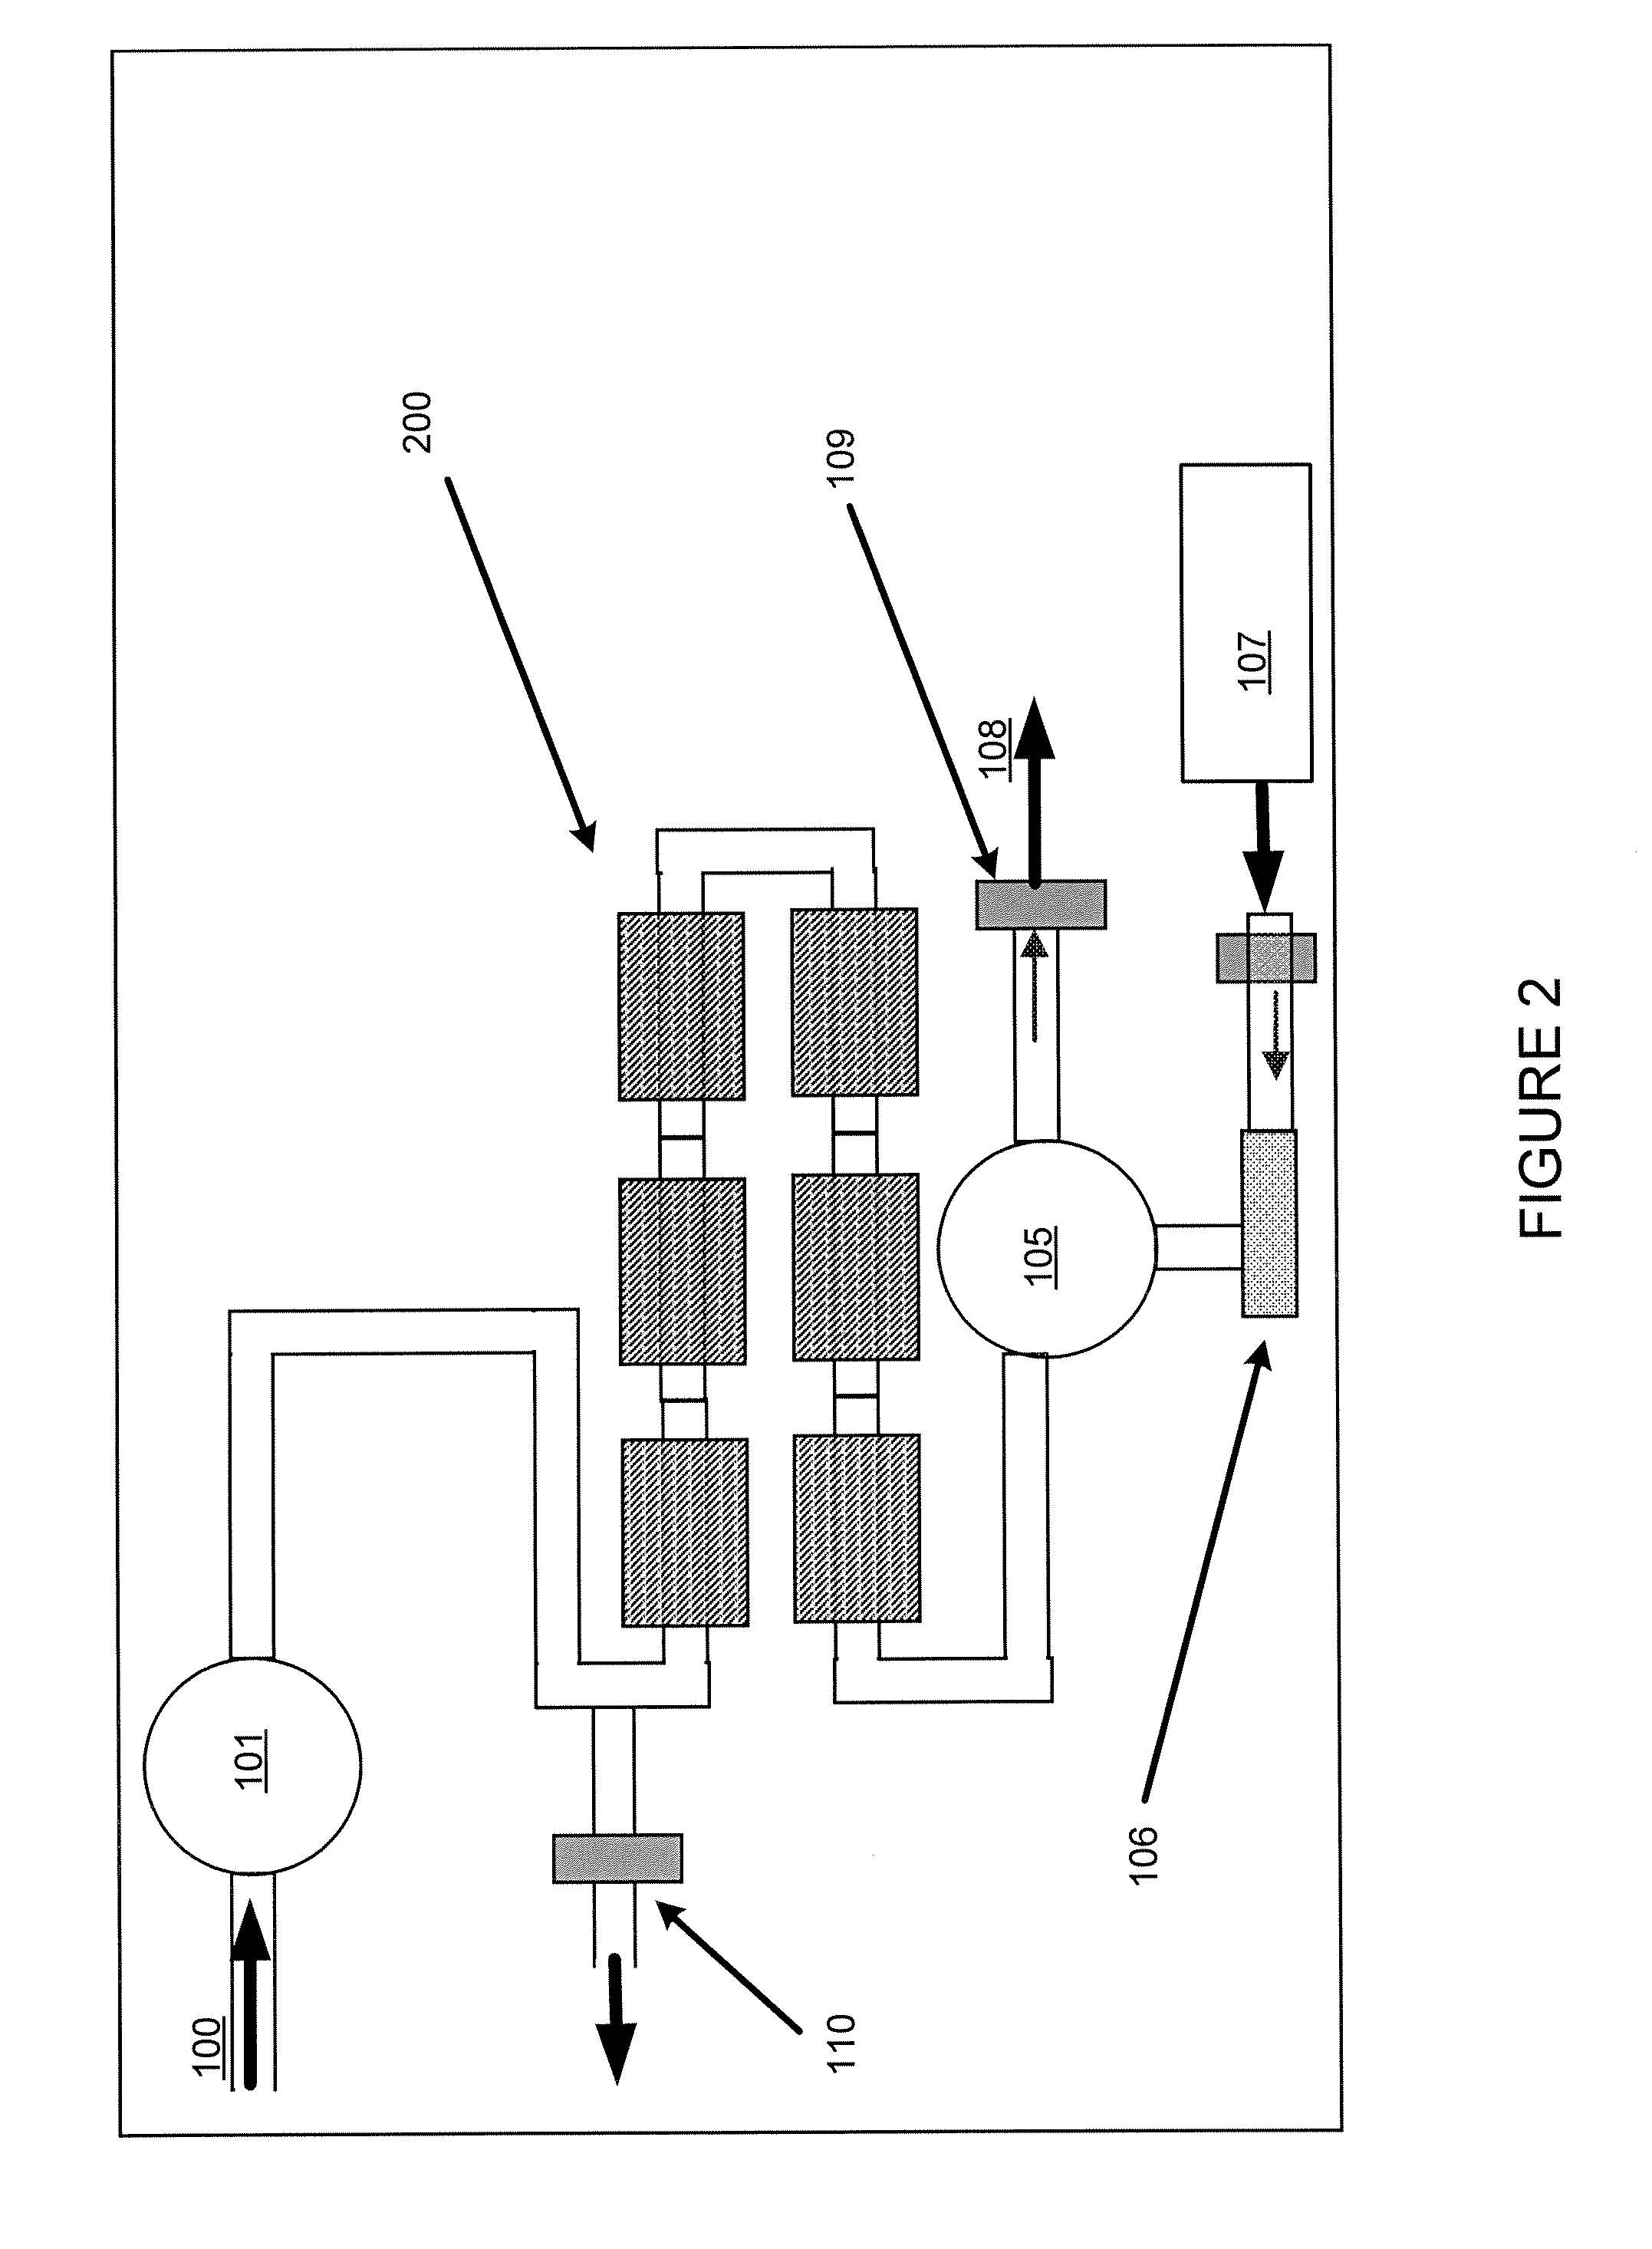 Method to remove agent from liquid phase